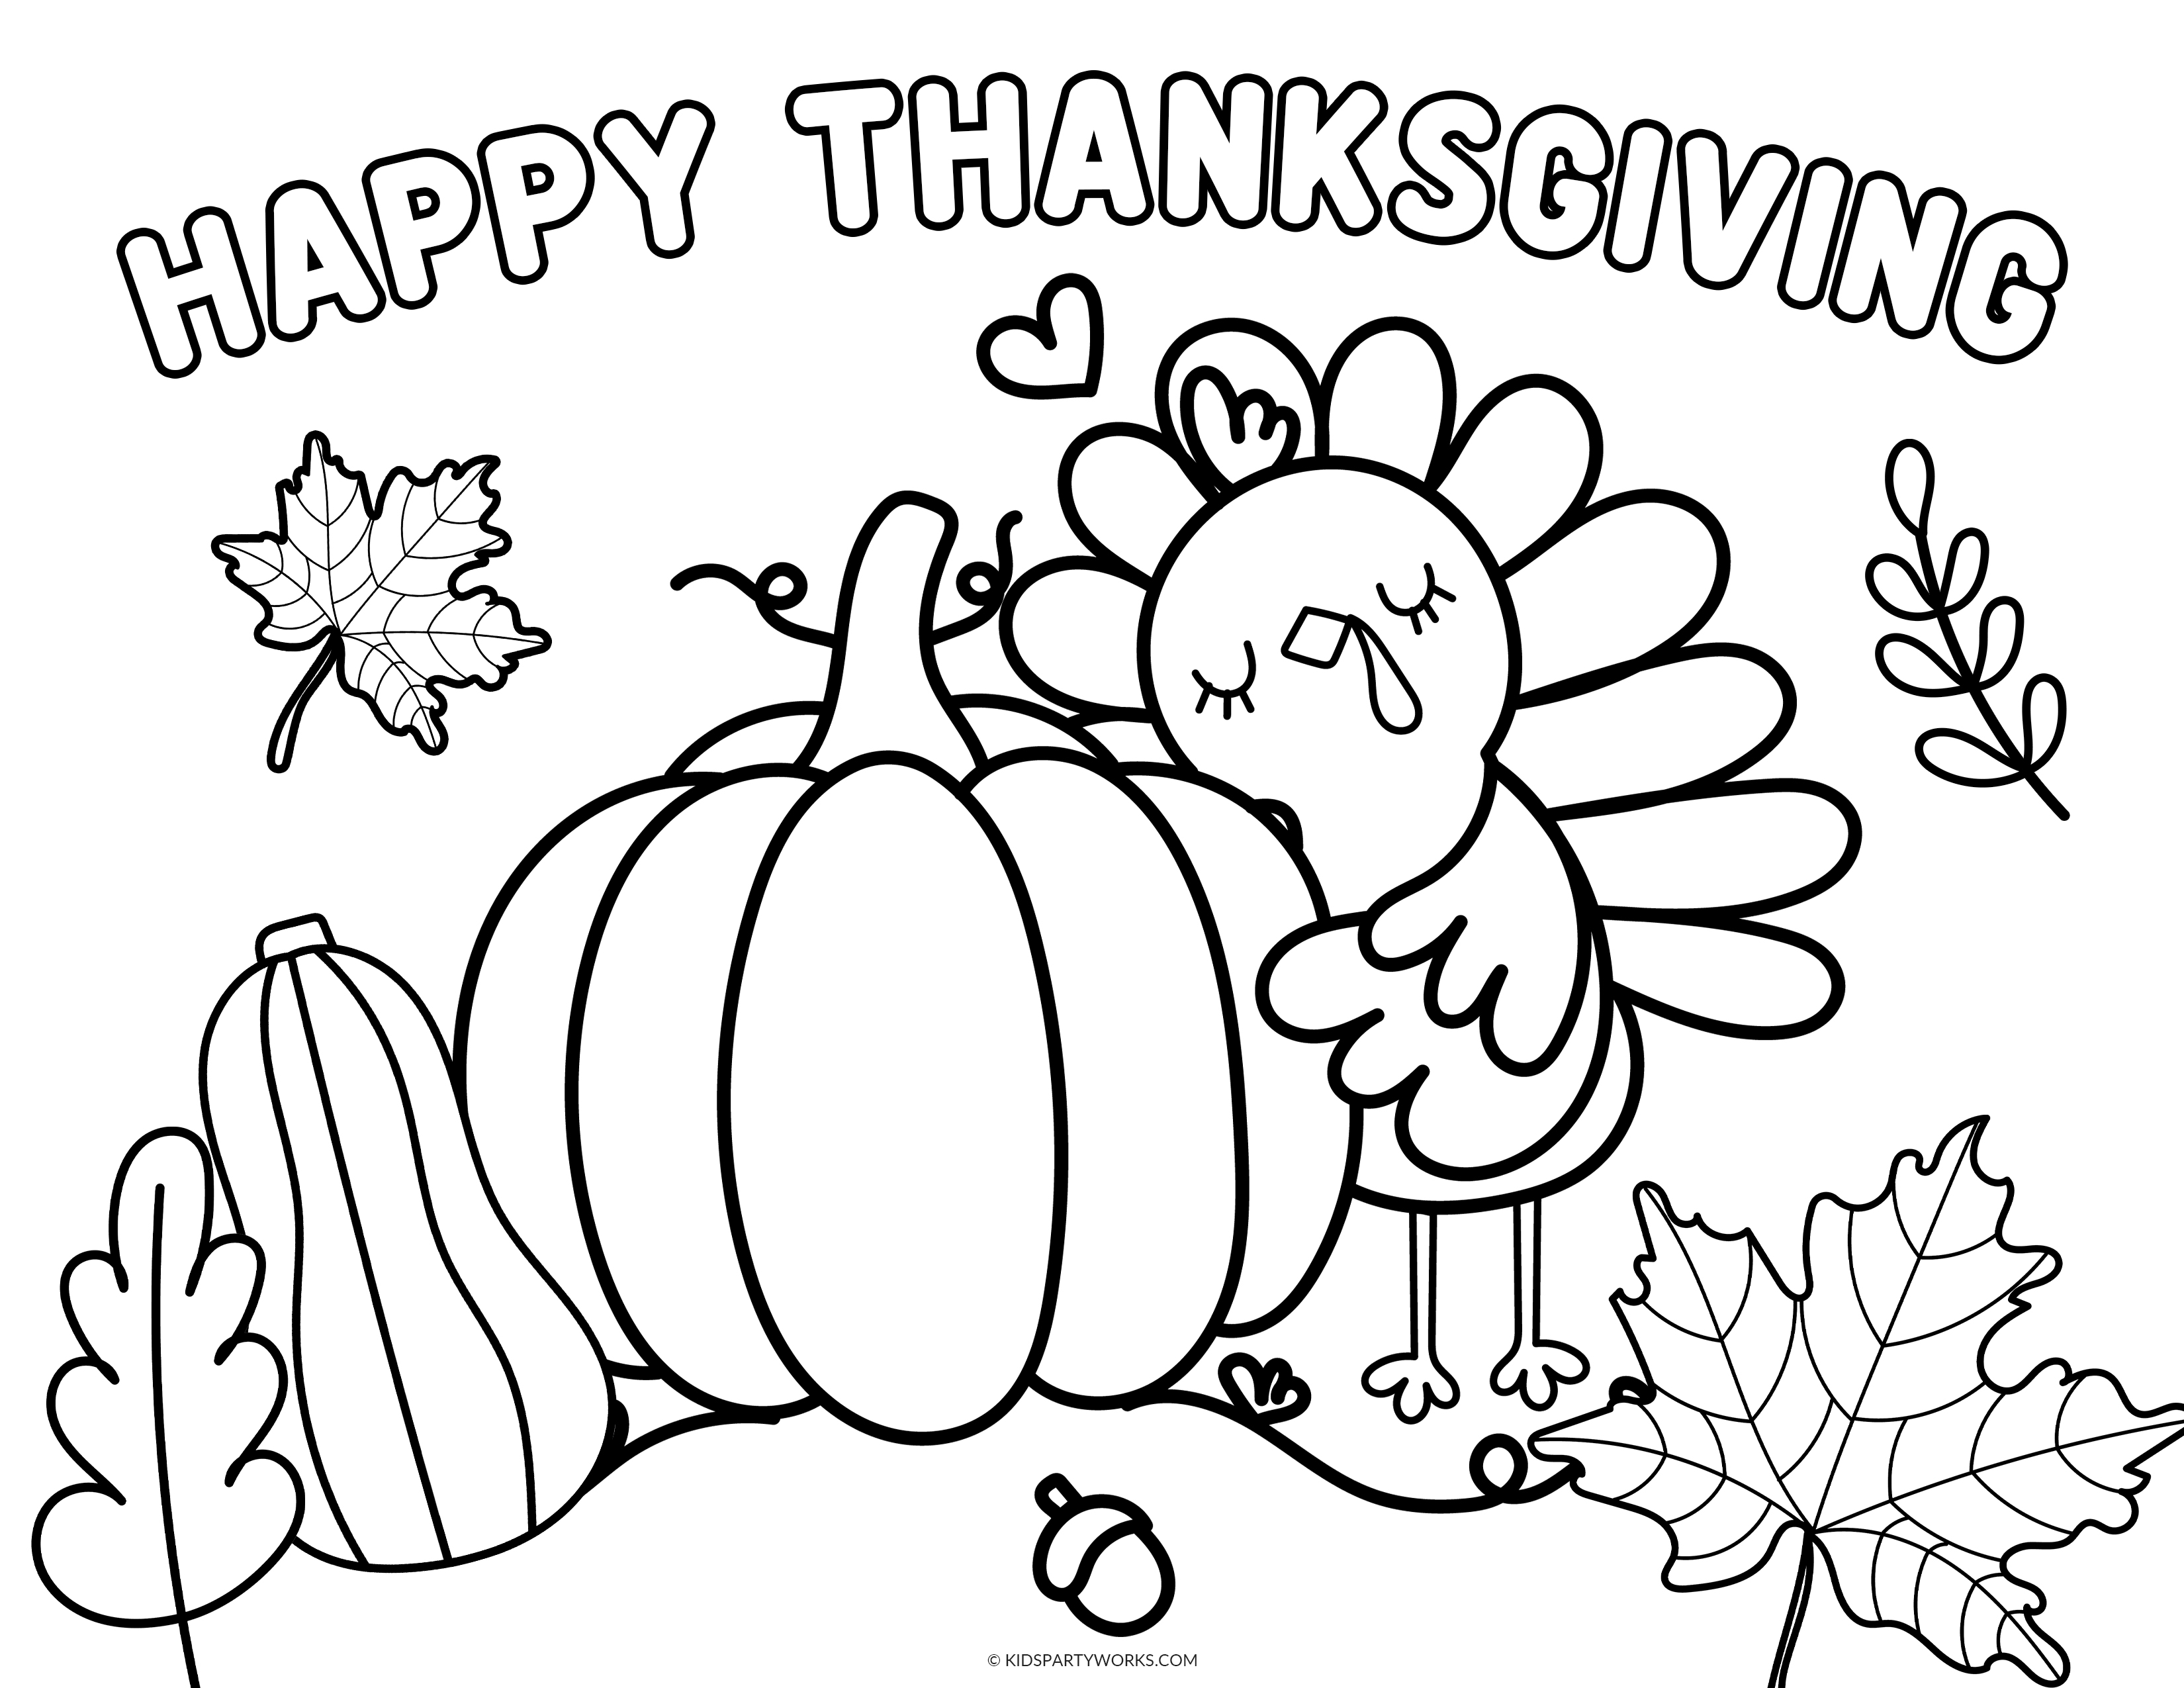 thanksgiving-coloring-page-mine2